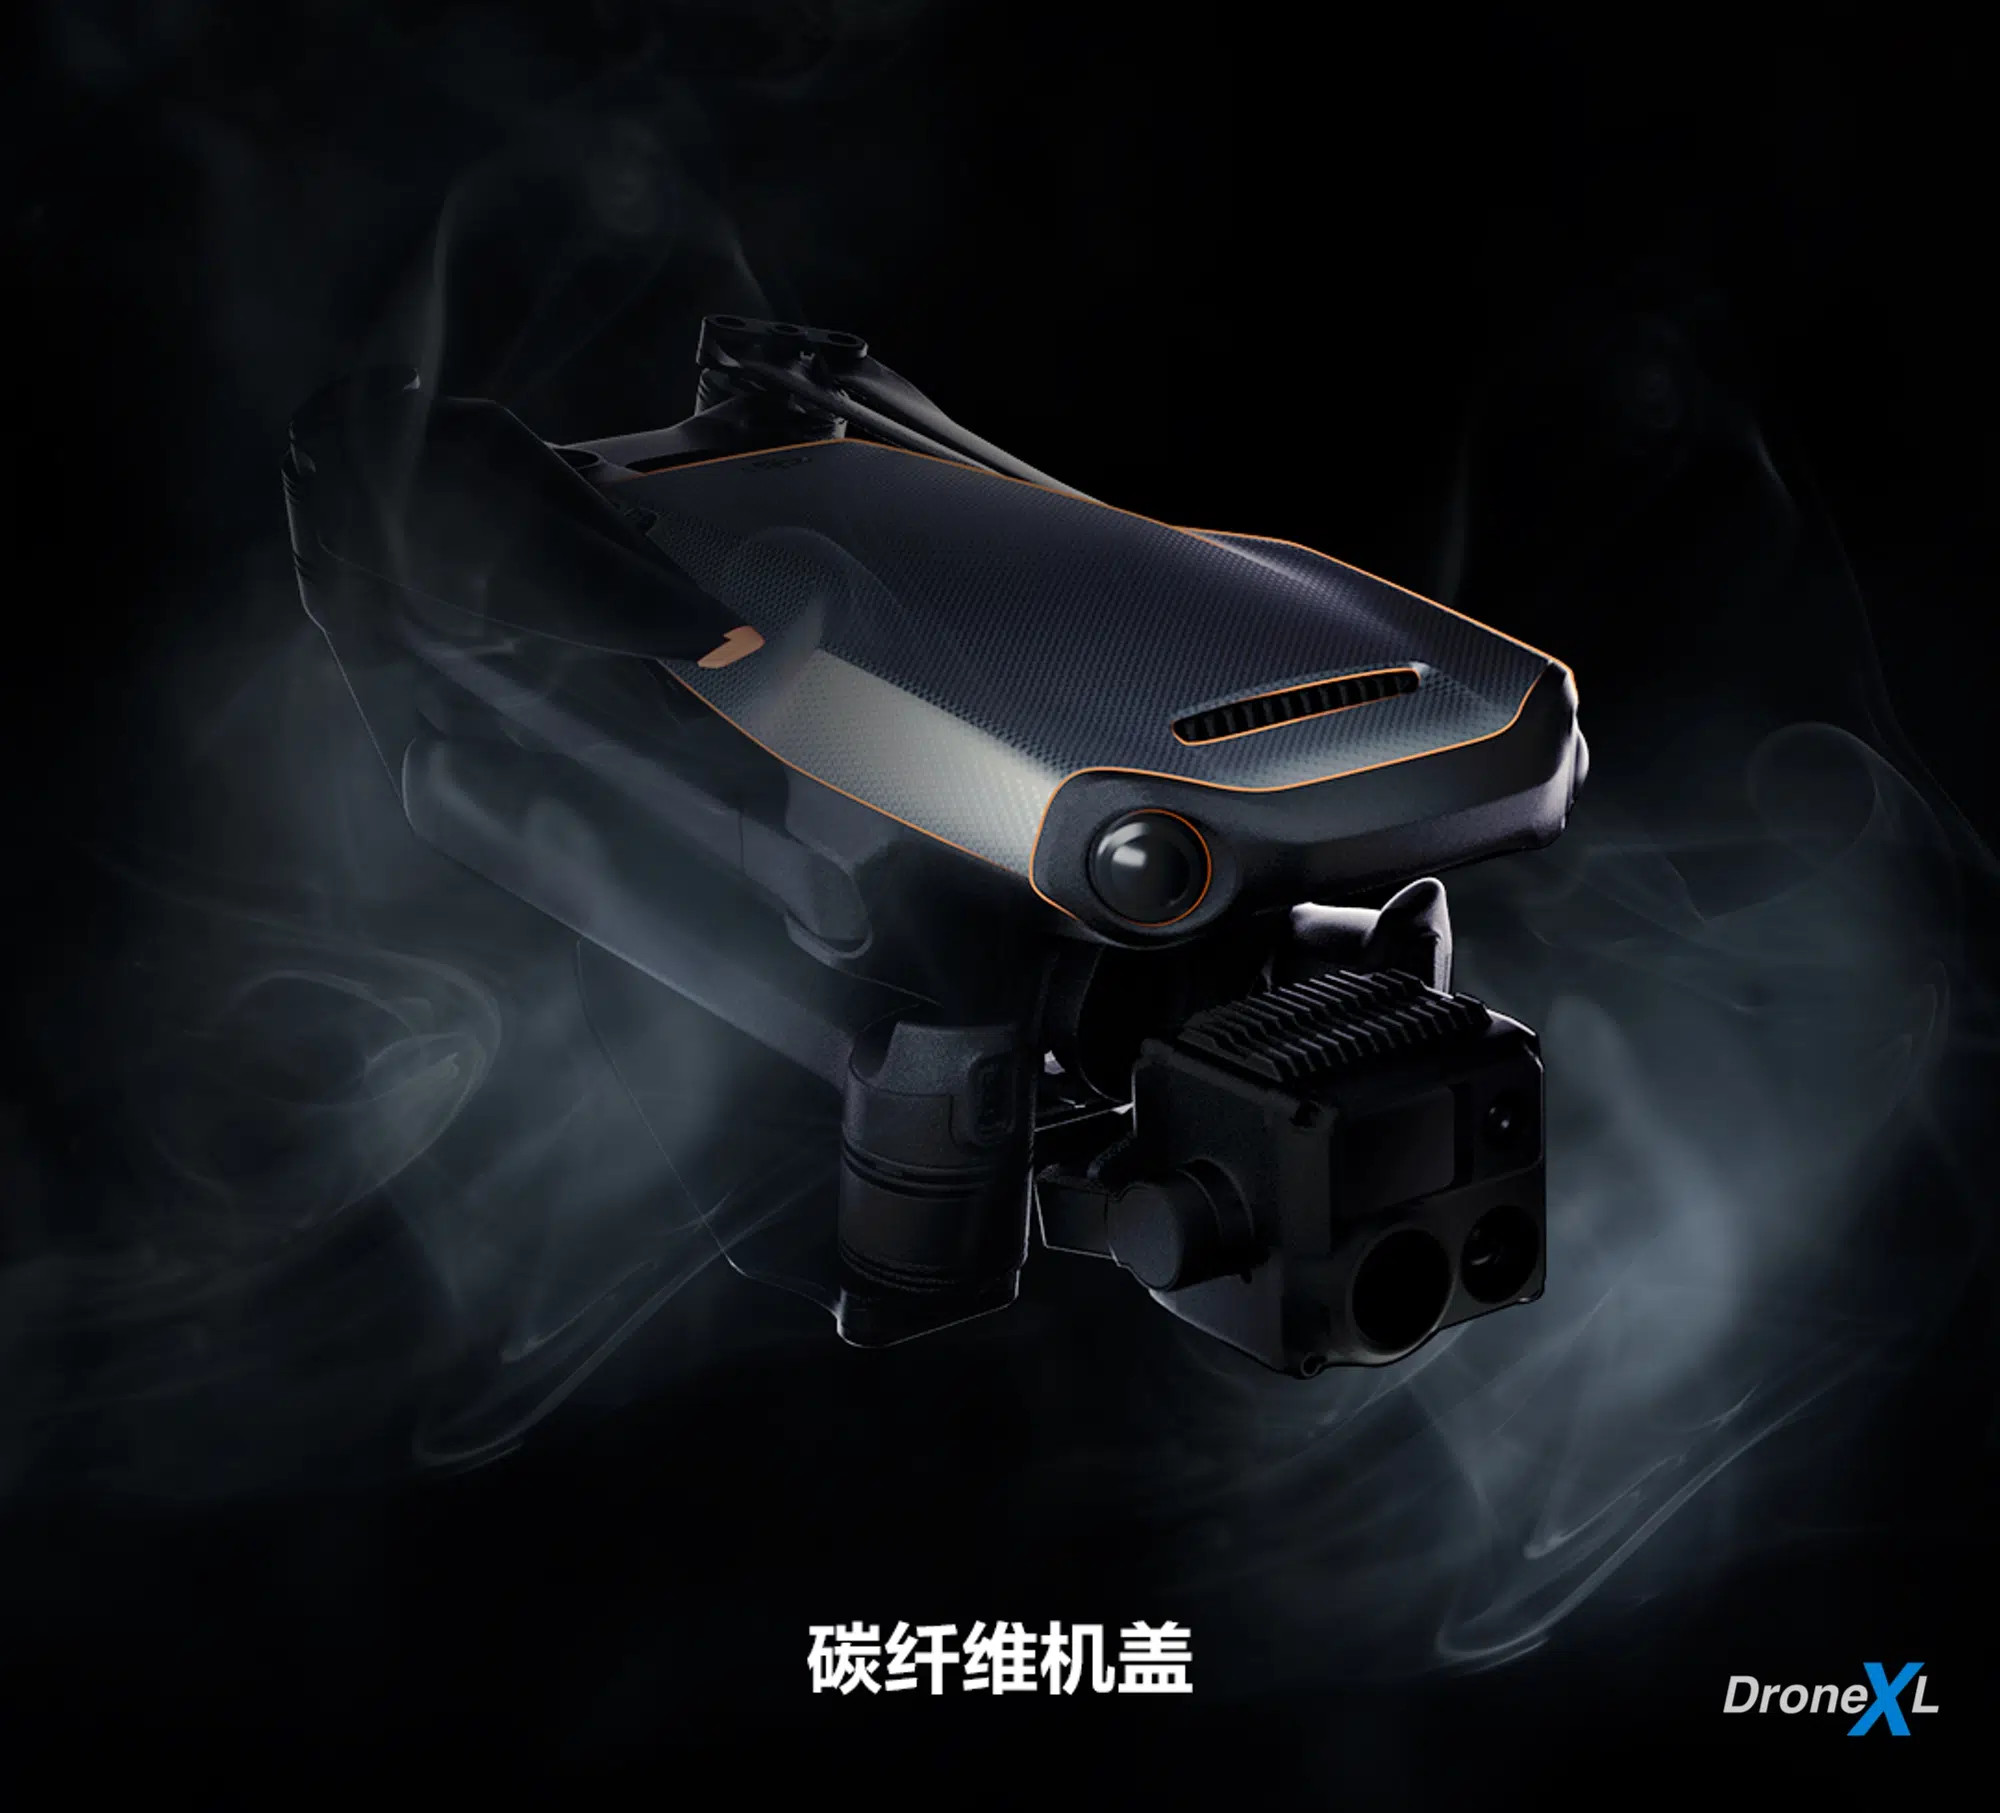 DJI plans new versions of the Mavic 3 Enterprise and Thermal